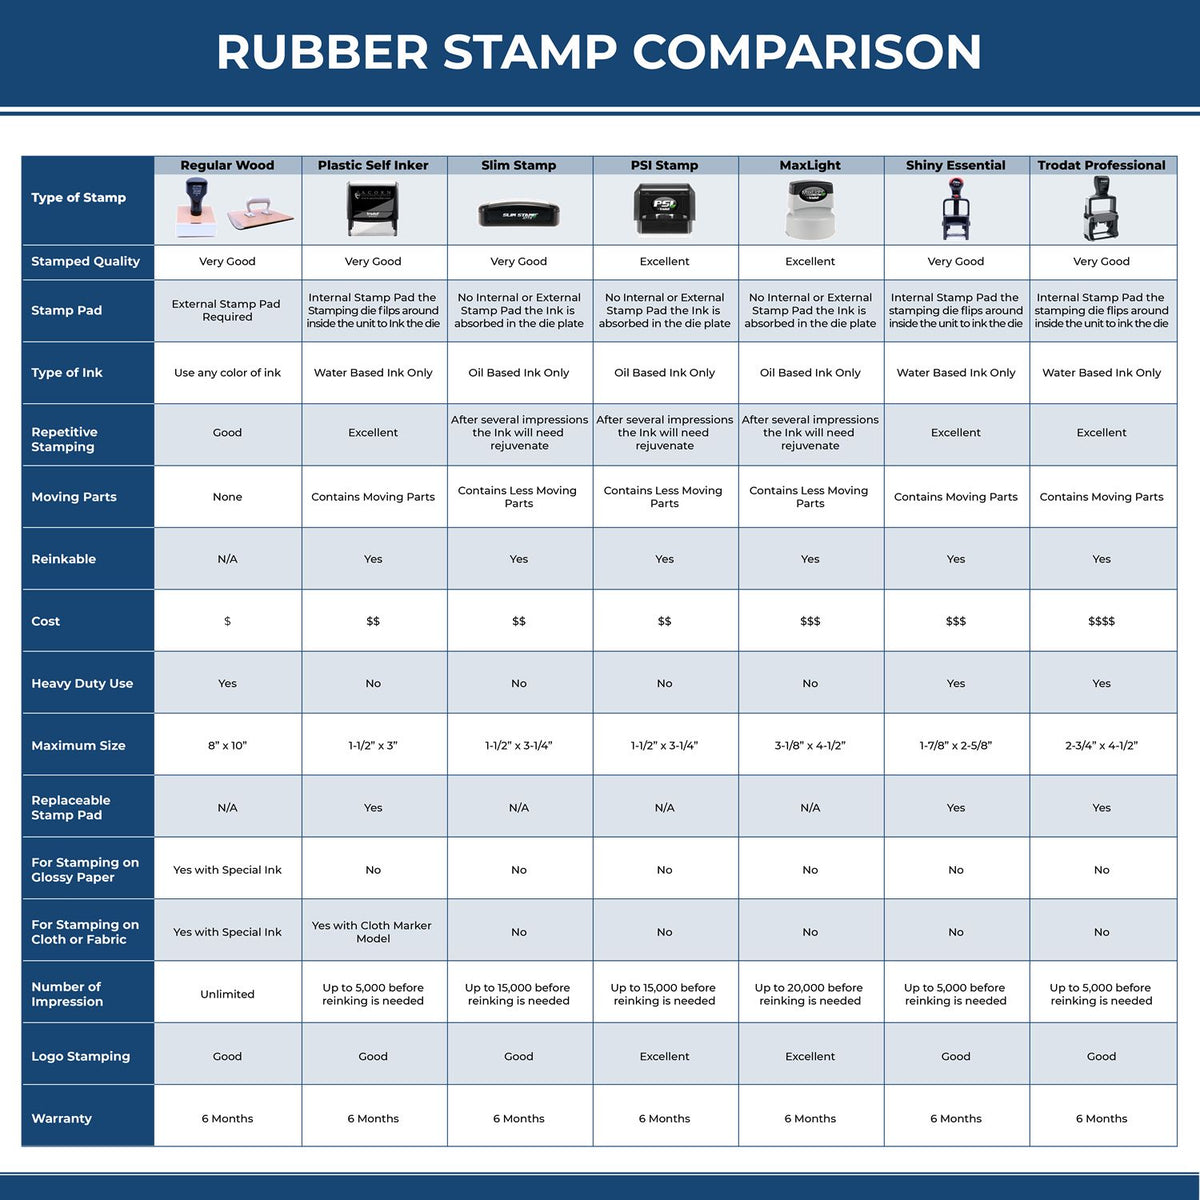 A comparison chart for the different types of mount models available for the Washington Professional Engineer Seal Stamp.